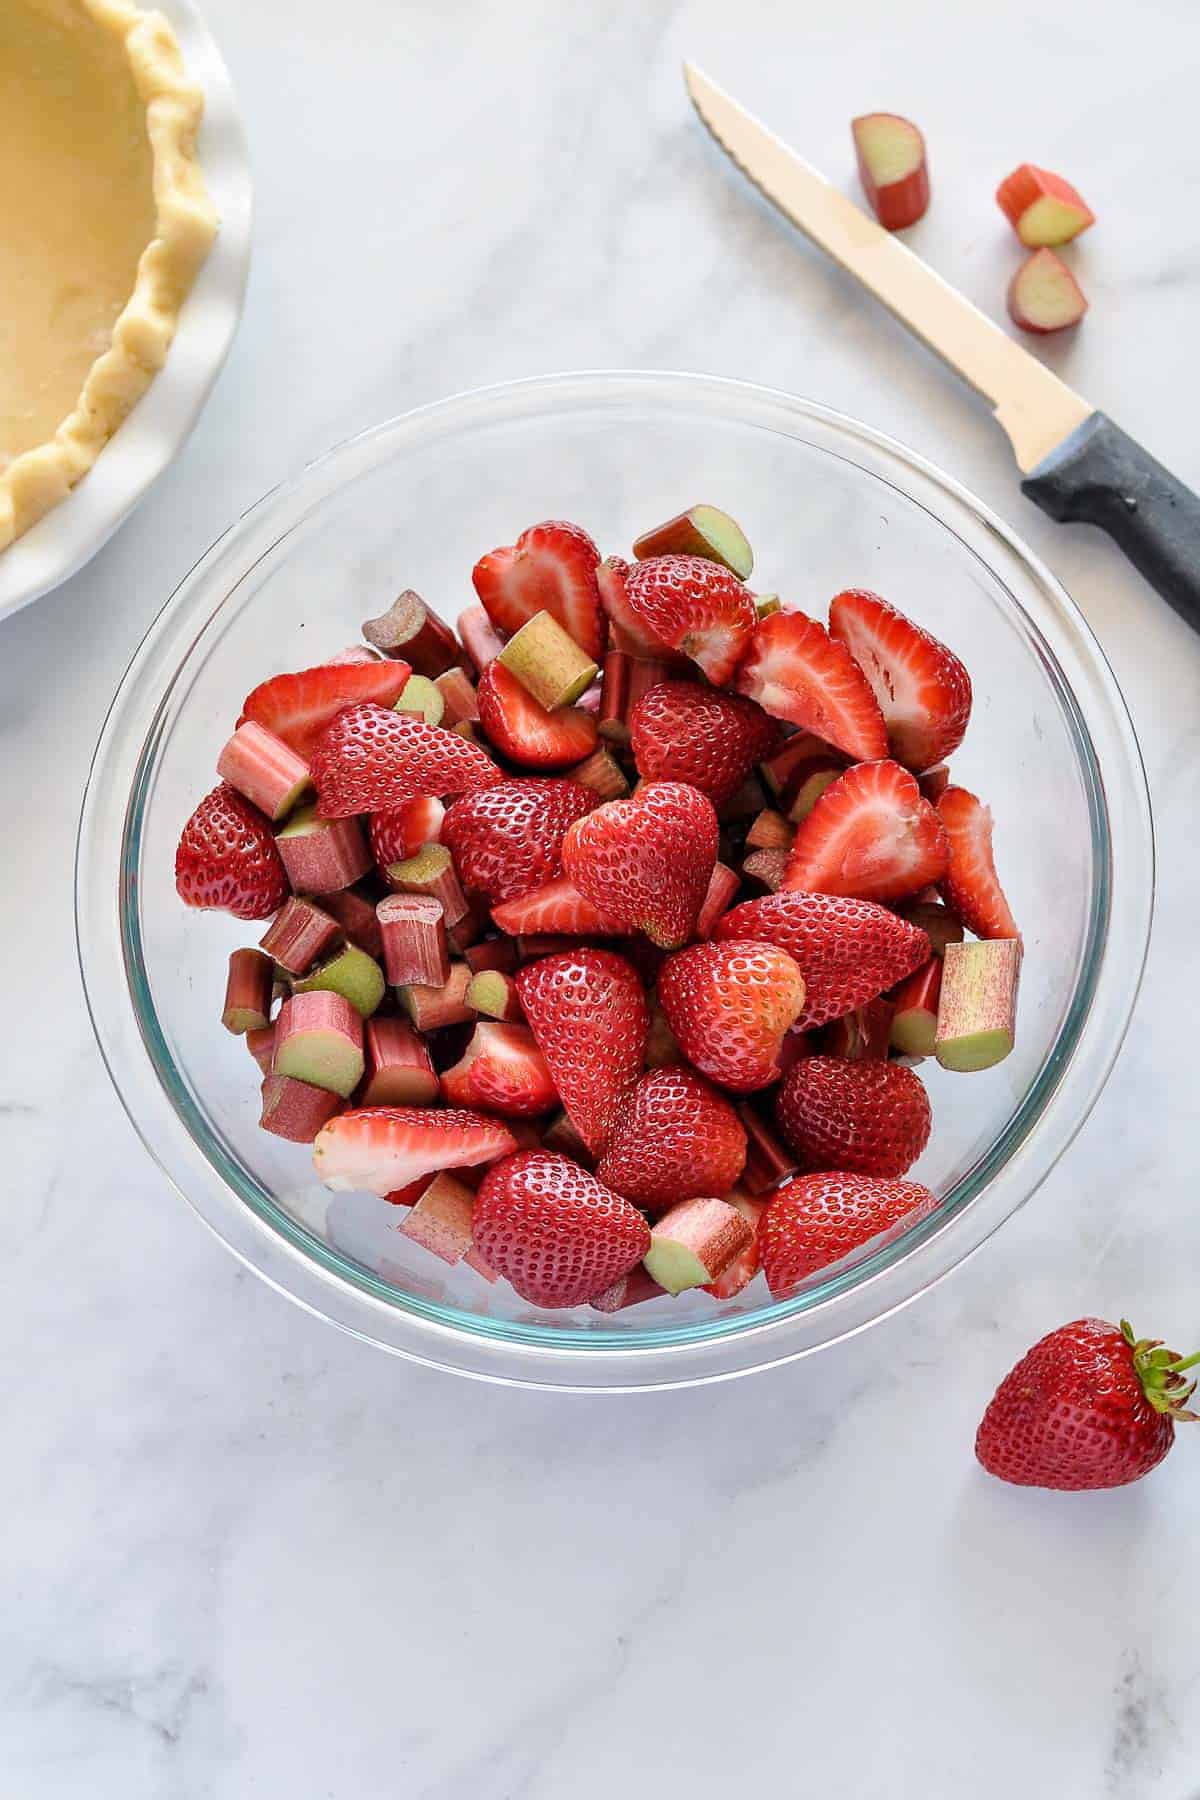 Sliced strawberries and chopped rhubarb in a bowl beside an empty unbaked pie crust.